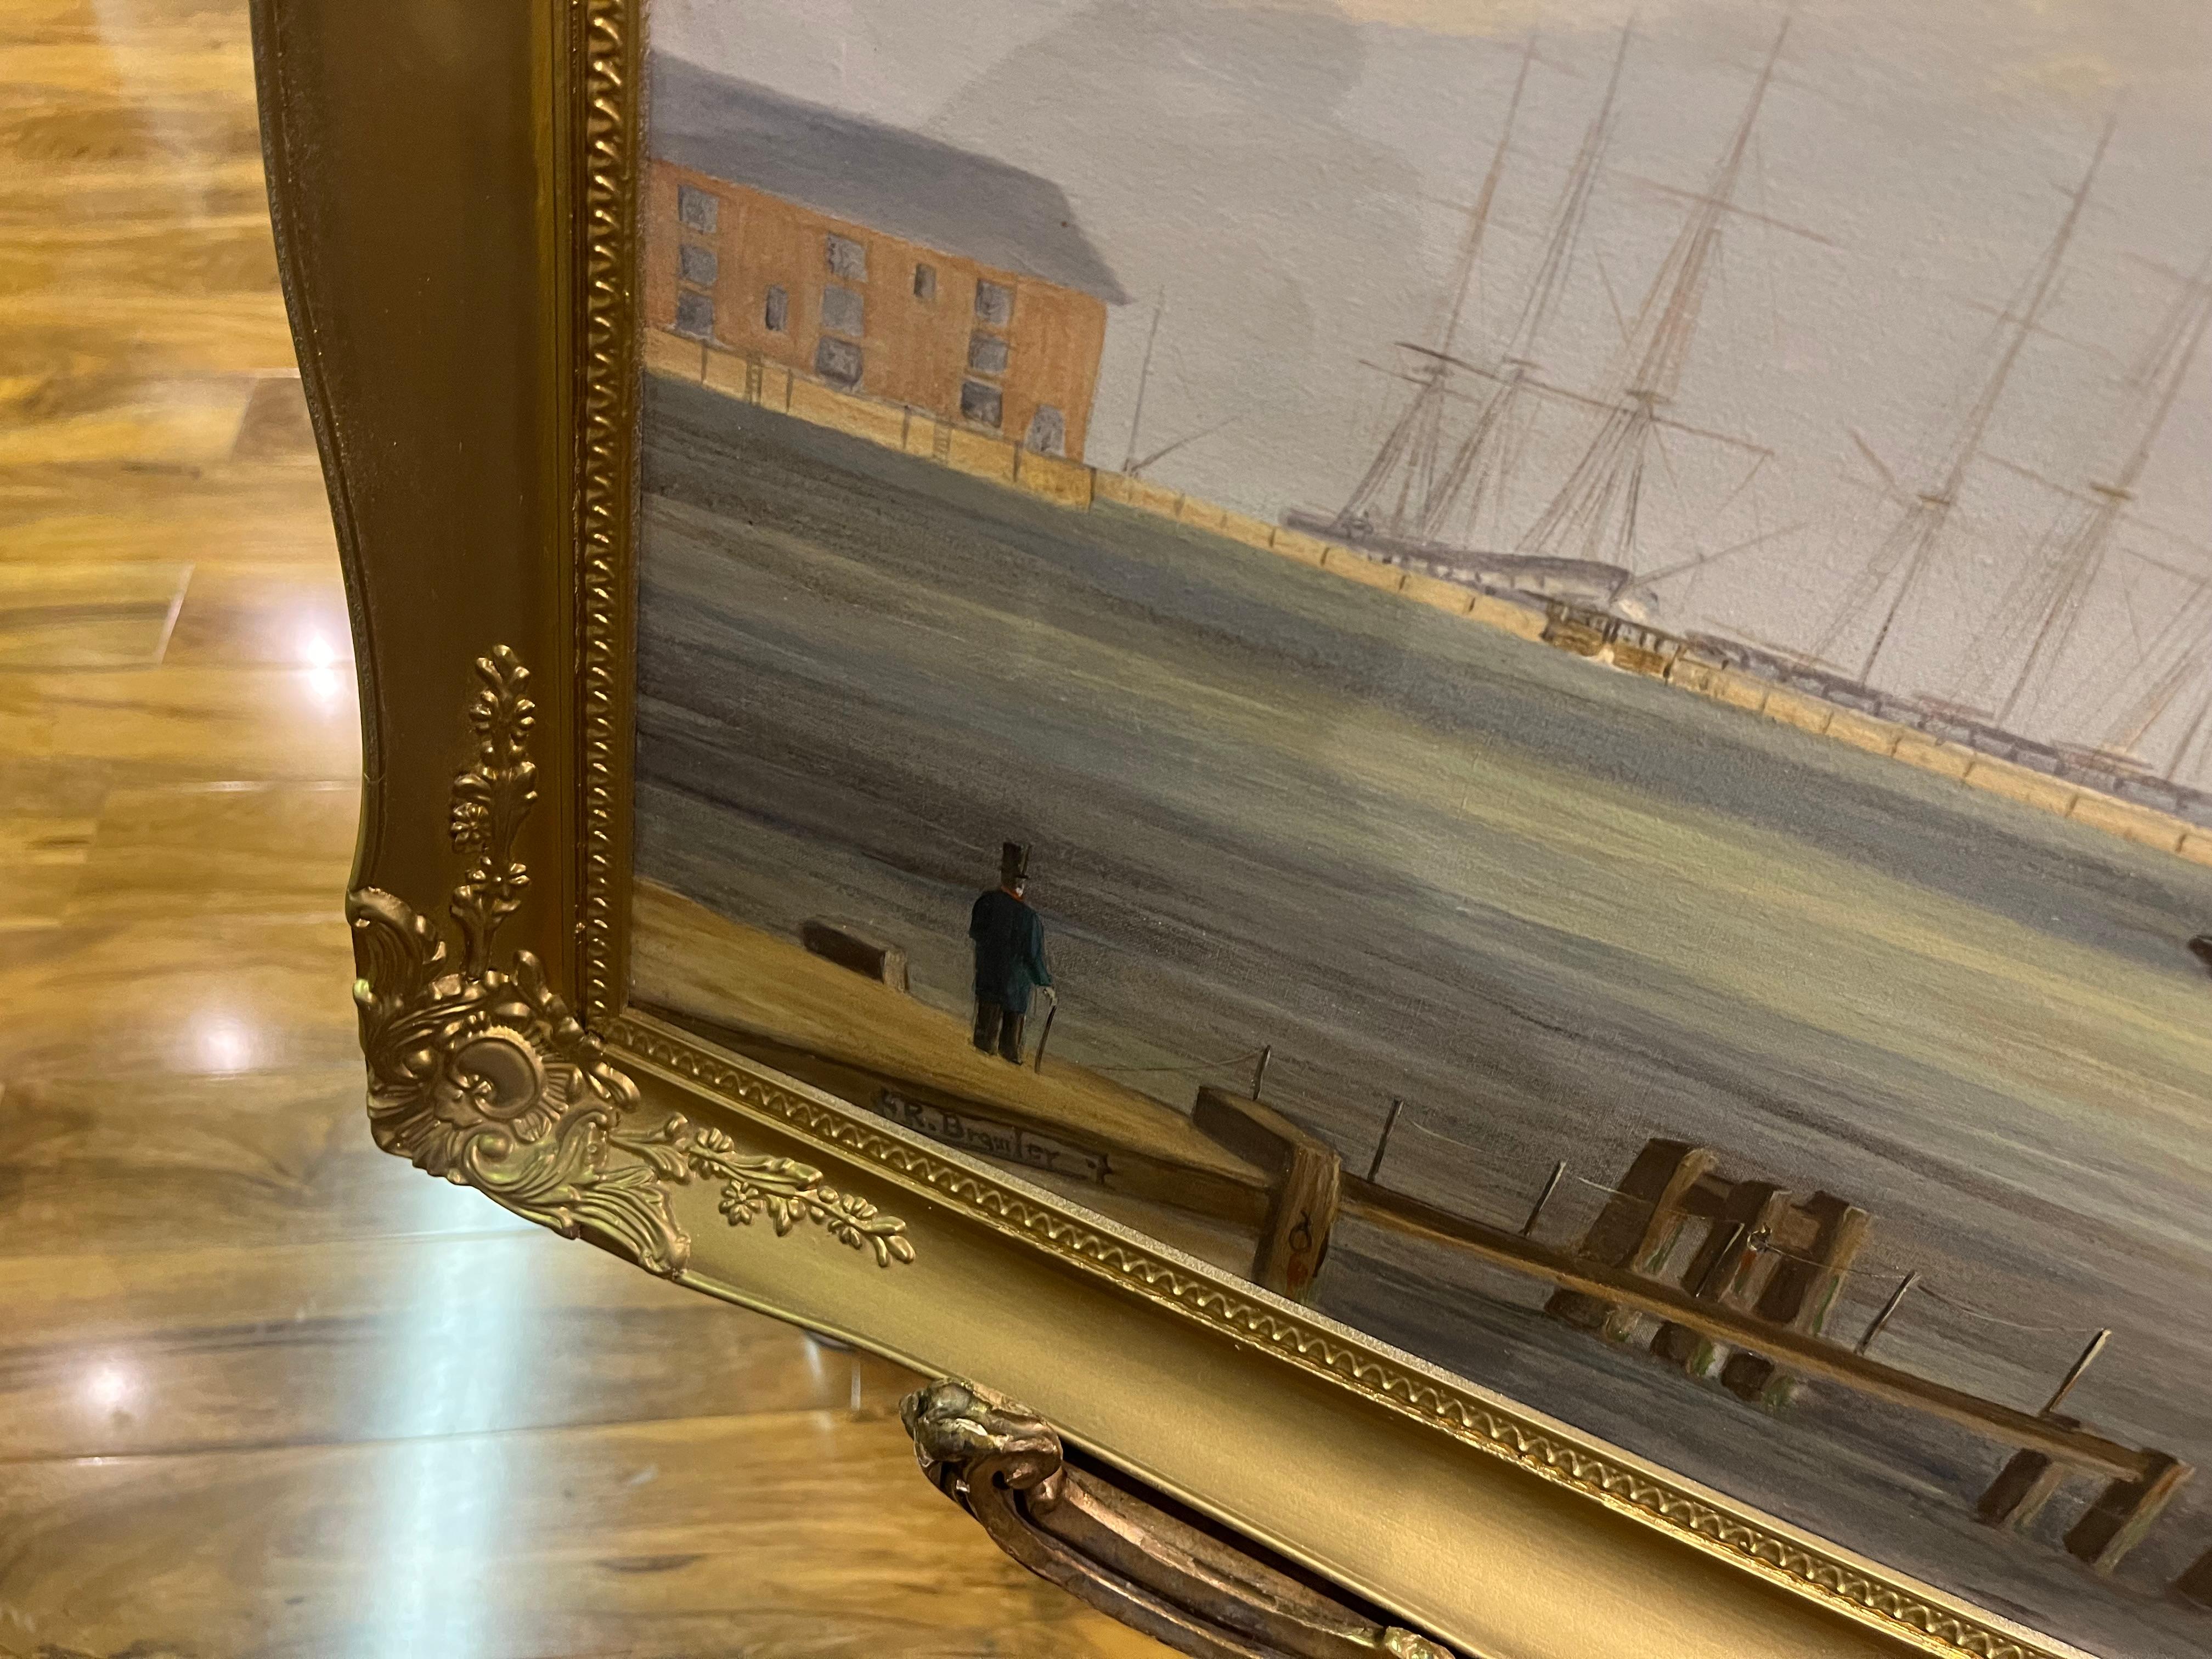 OIL PAINTING LARGE  ROBERT BRAMLEY (NAVY ADMIRALTY 20th CENTURY

Very good condition for age , (see pictures)

FINE RARE MARTINE PAINTING ORIGINAL

OLD MASTER 19th Century STYLE OIL PAINTING GOLD GILT FRAME

By Similar $12,000 Premier